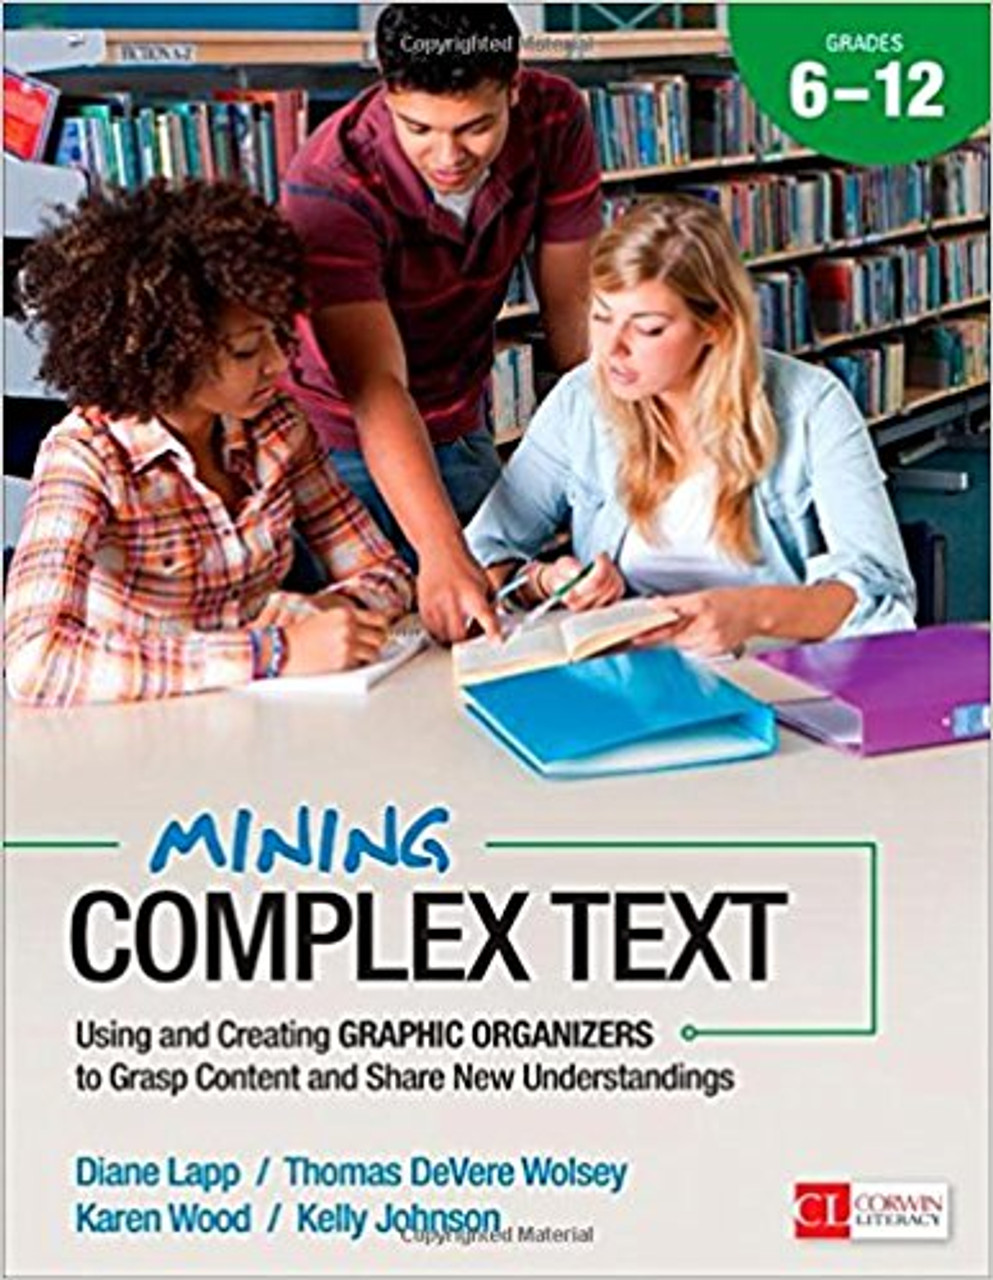 Mining Complex Text, Grades 6-12: Using and Creating Graphic Organizers to Grasp Content and Share New Understandings by Diane K Lapp